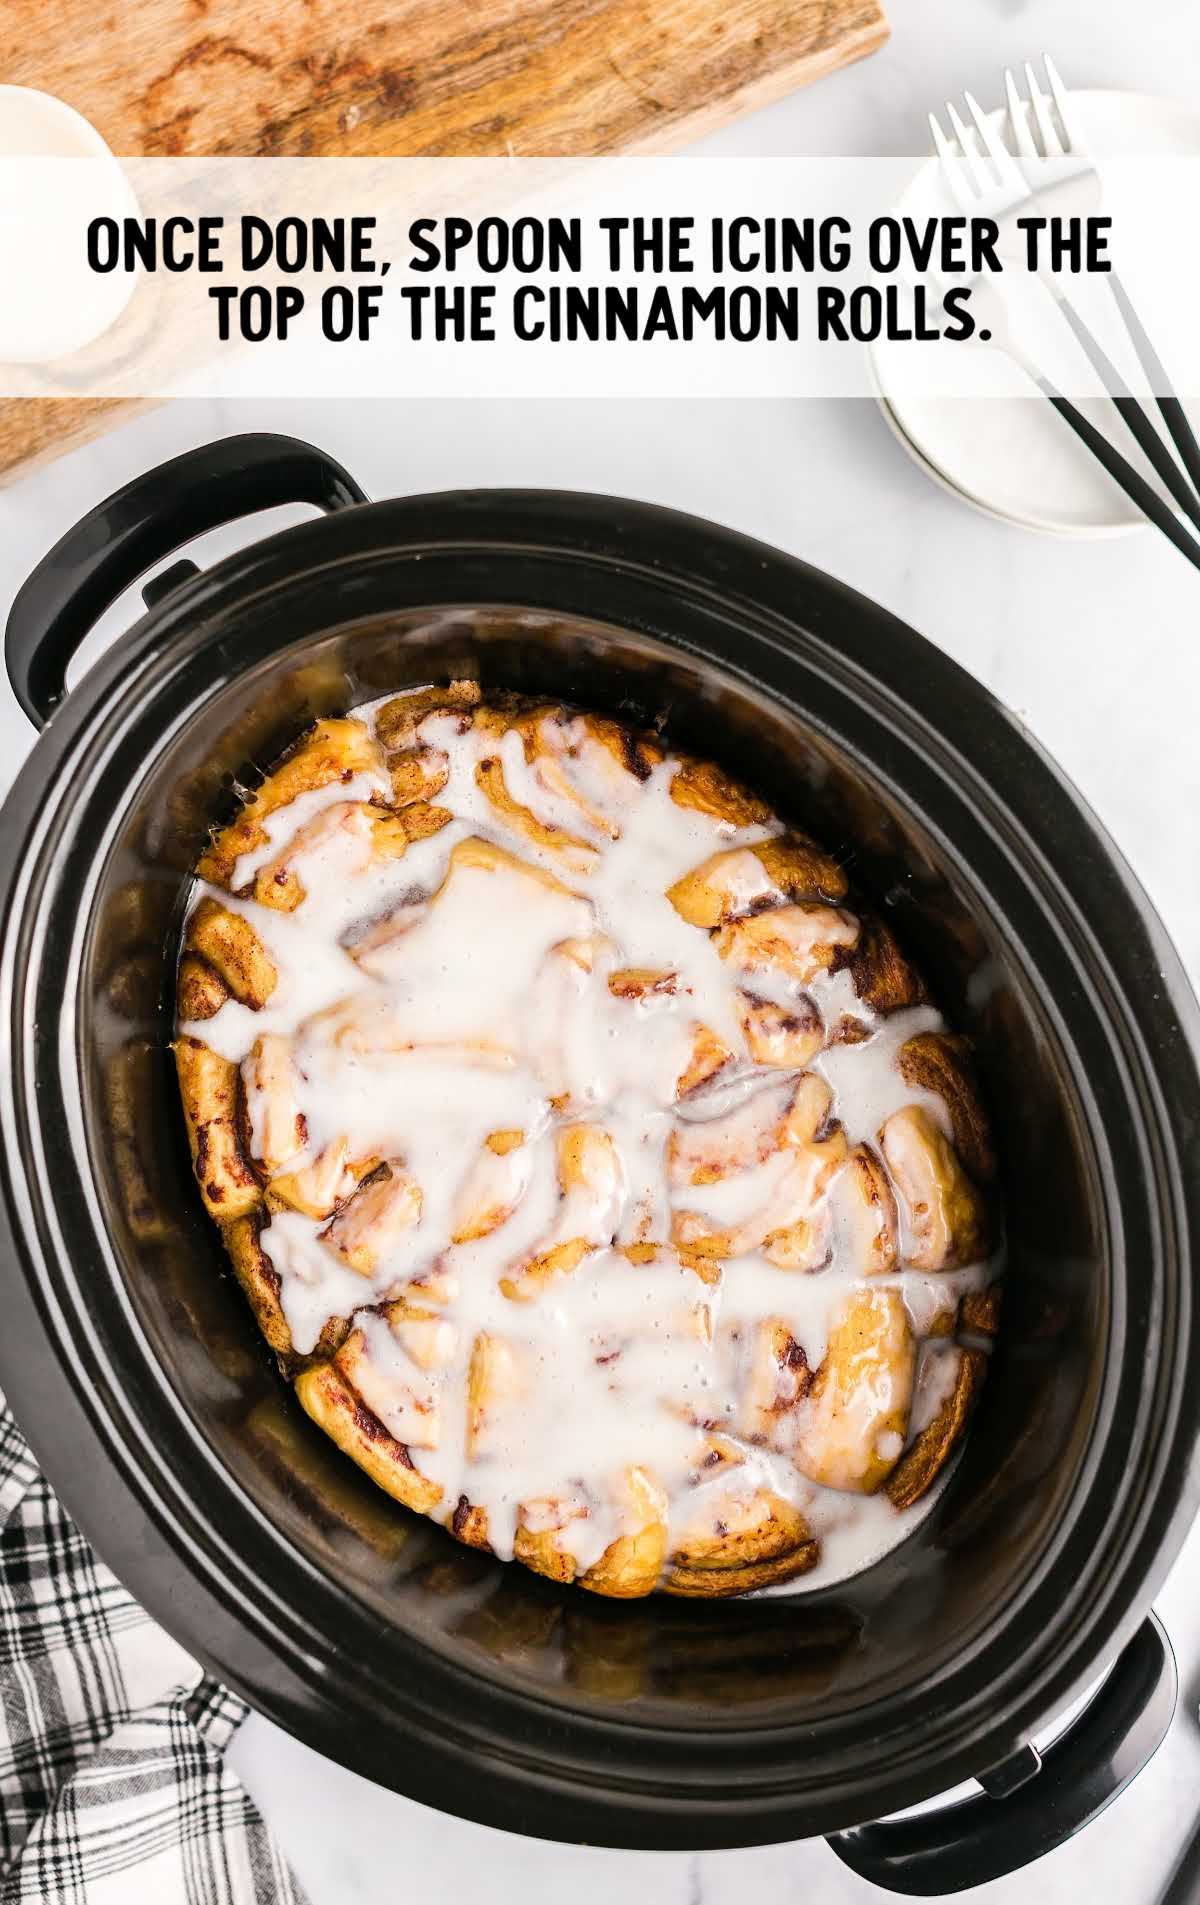 icing spooned on top of cinnamon rolls in a crockpot